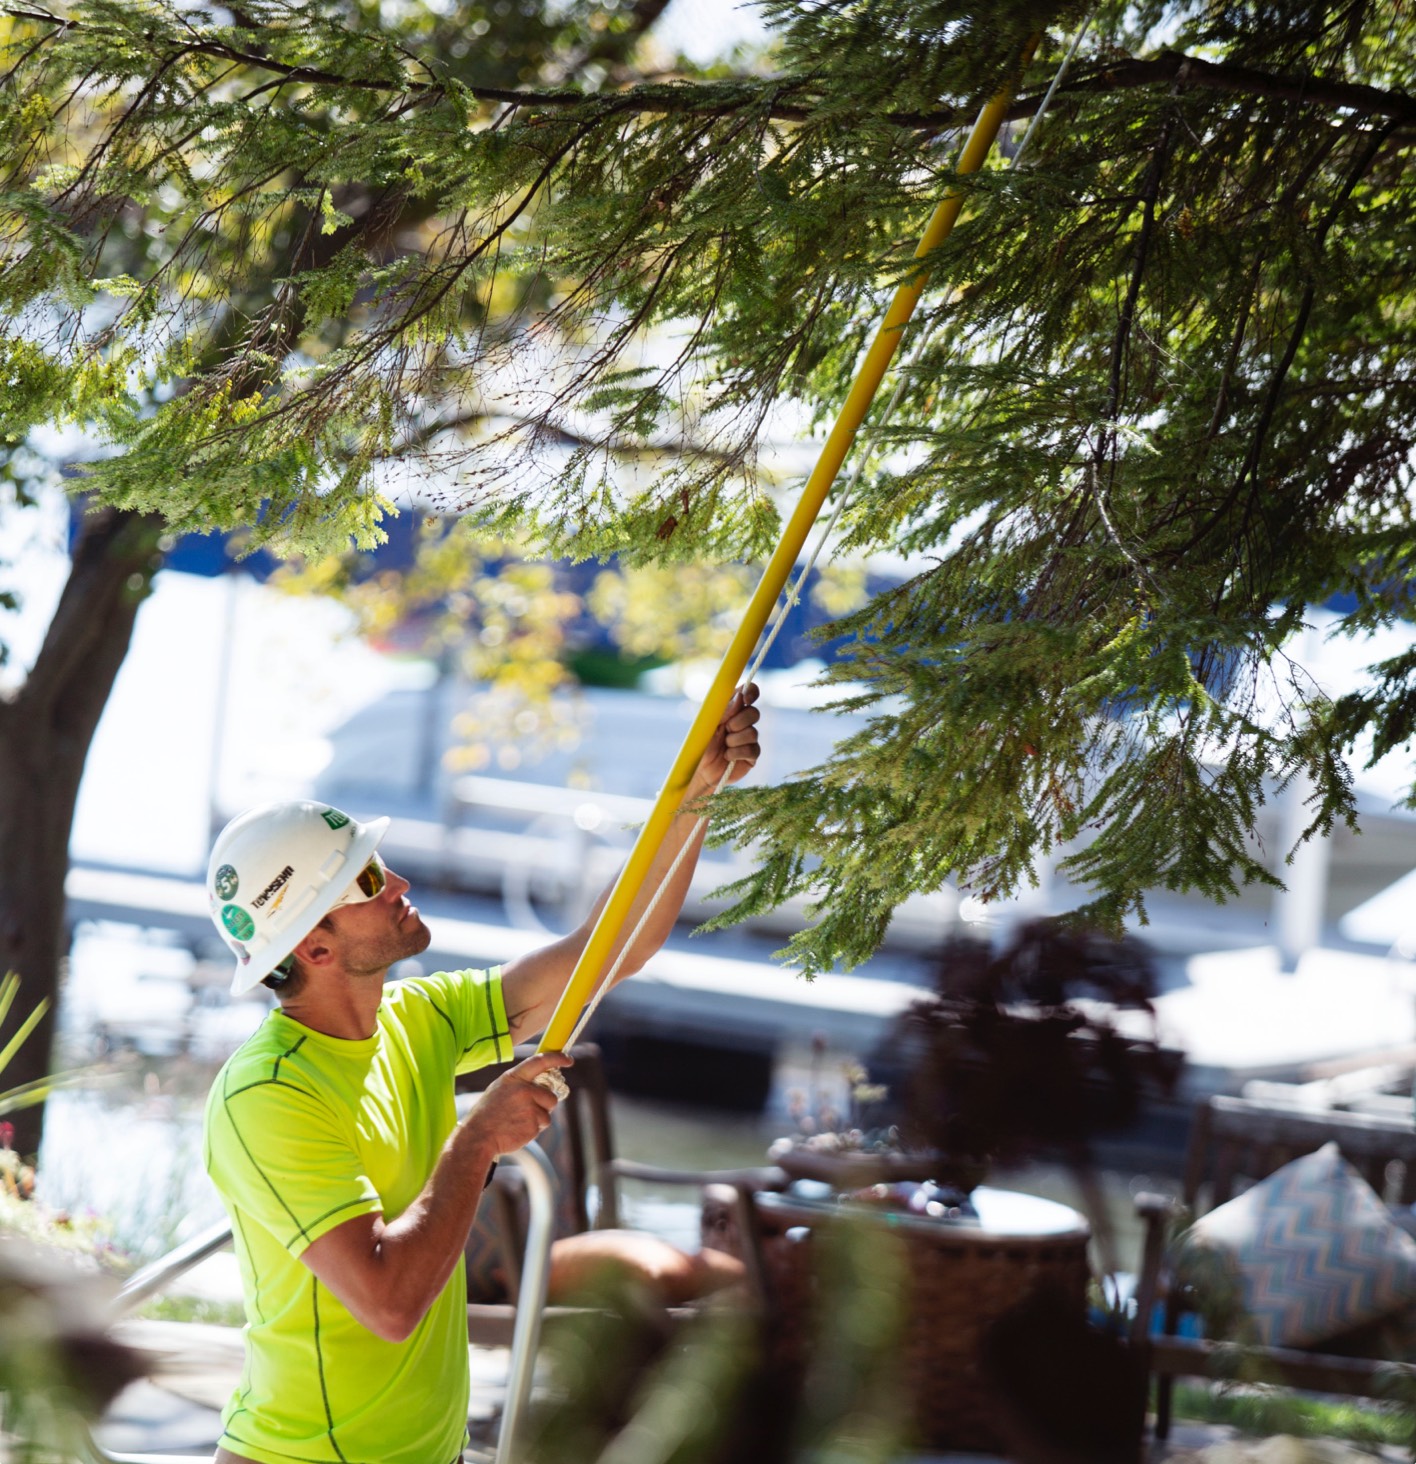 Professional and safe tree trimming services for your home available from the experts at Townsend Arborcare.